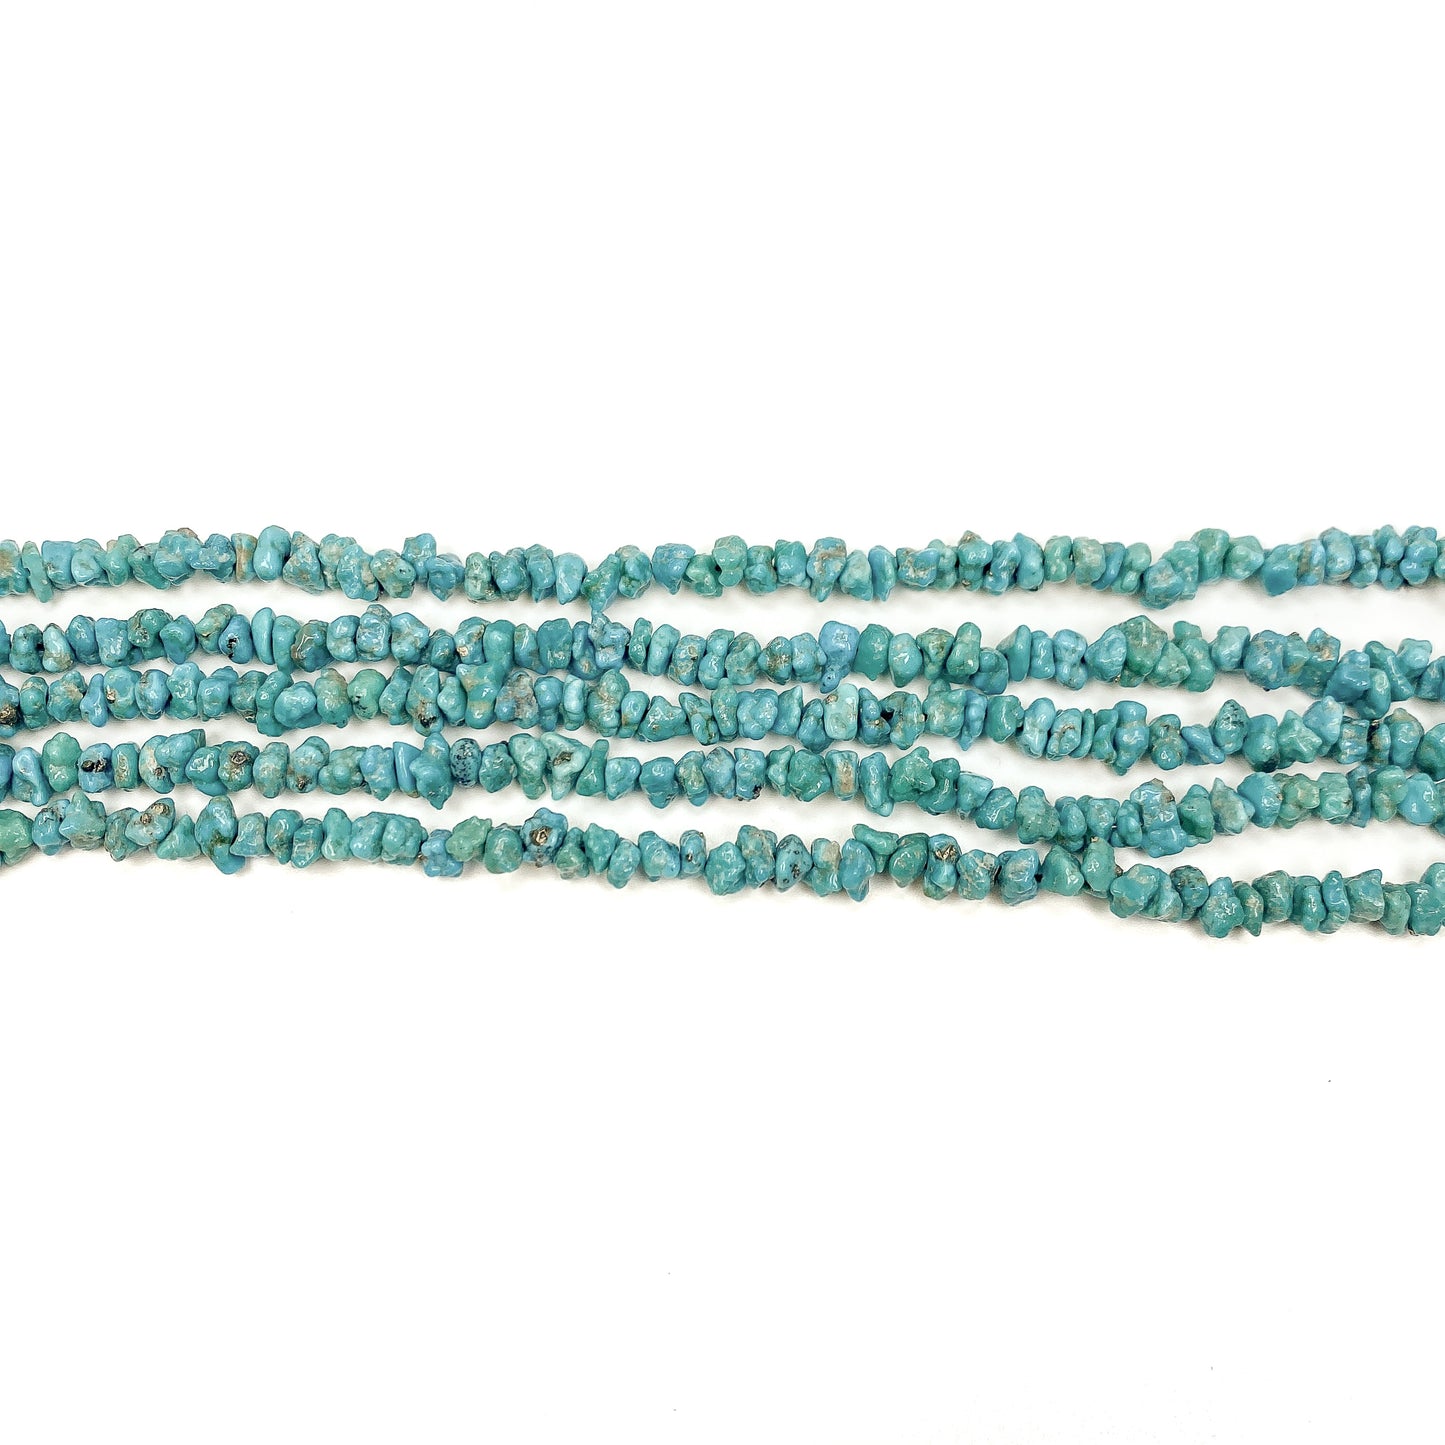 Campitos Turquoise 6mm Tumbled Chip Bead - 8.5" Strand